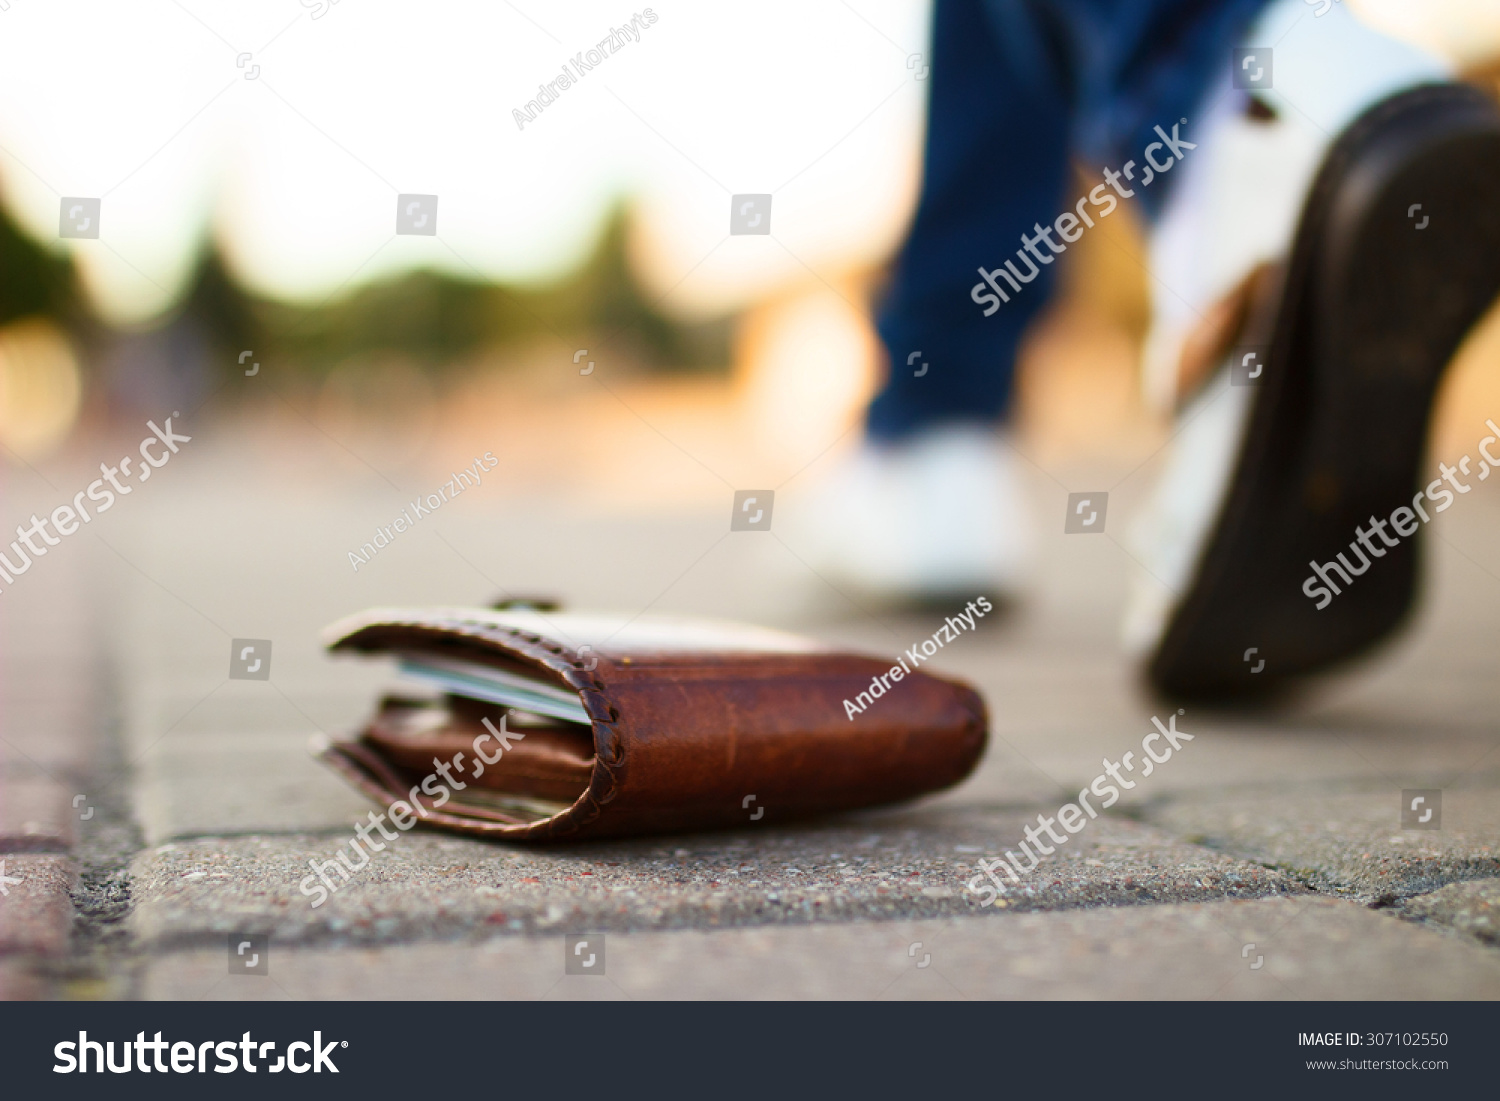 Girl has lost her wallet with money on city street at sunny summer day. Close-up shot of brown leather wallet laying at sidewalk, and feet of woman going away on the background. Concept of money loss #307102550